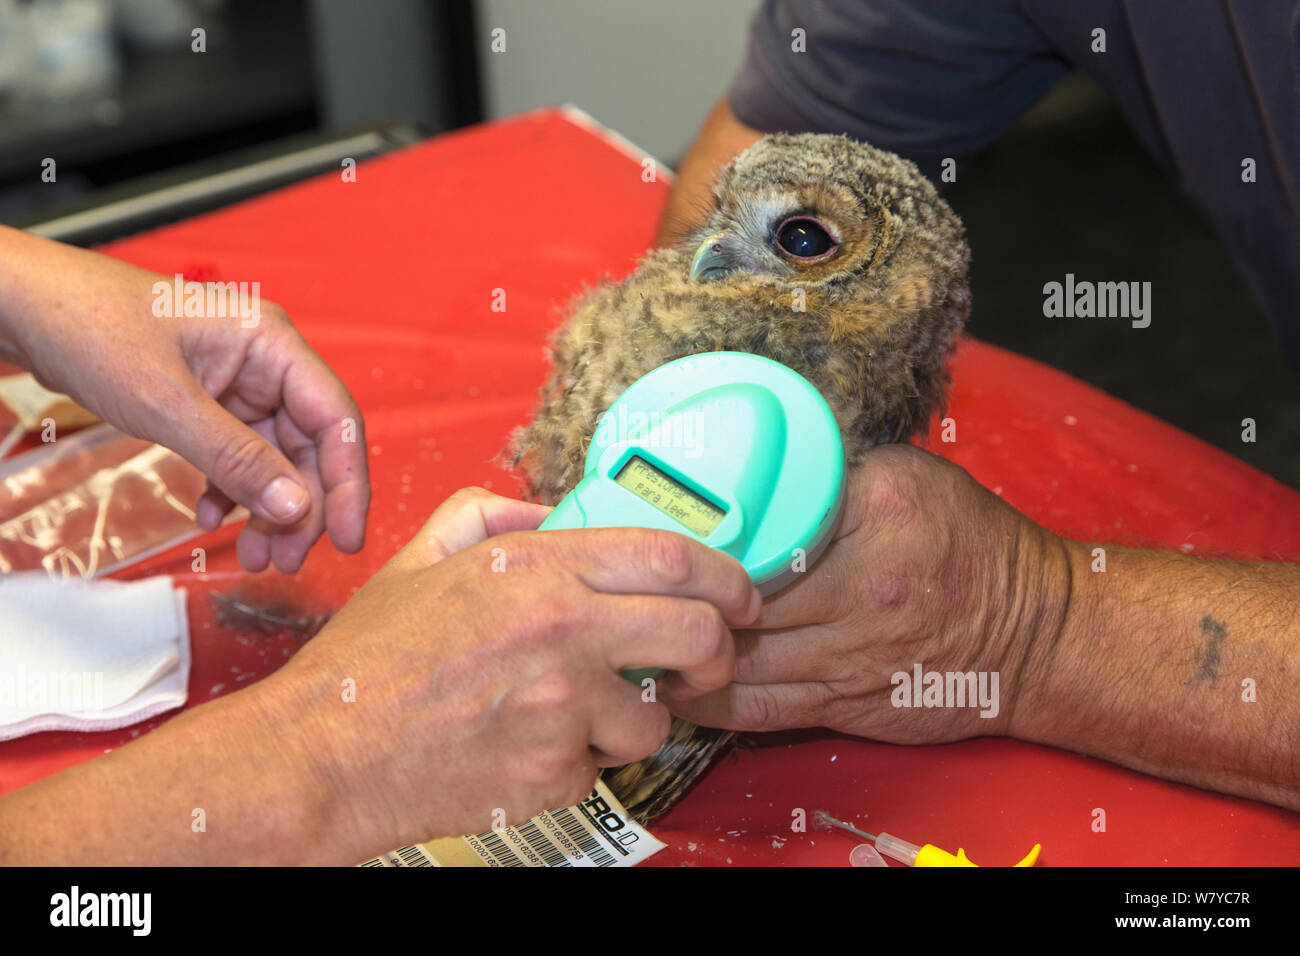 Scanning newly inserted microchip in juvenile tawny owl (Strix aluco) prior to release into wild, Secret World animal sanctuary, Somerset, UK, June. Stock Photo